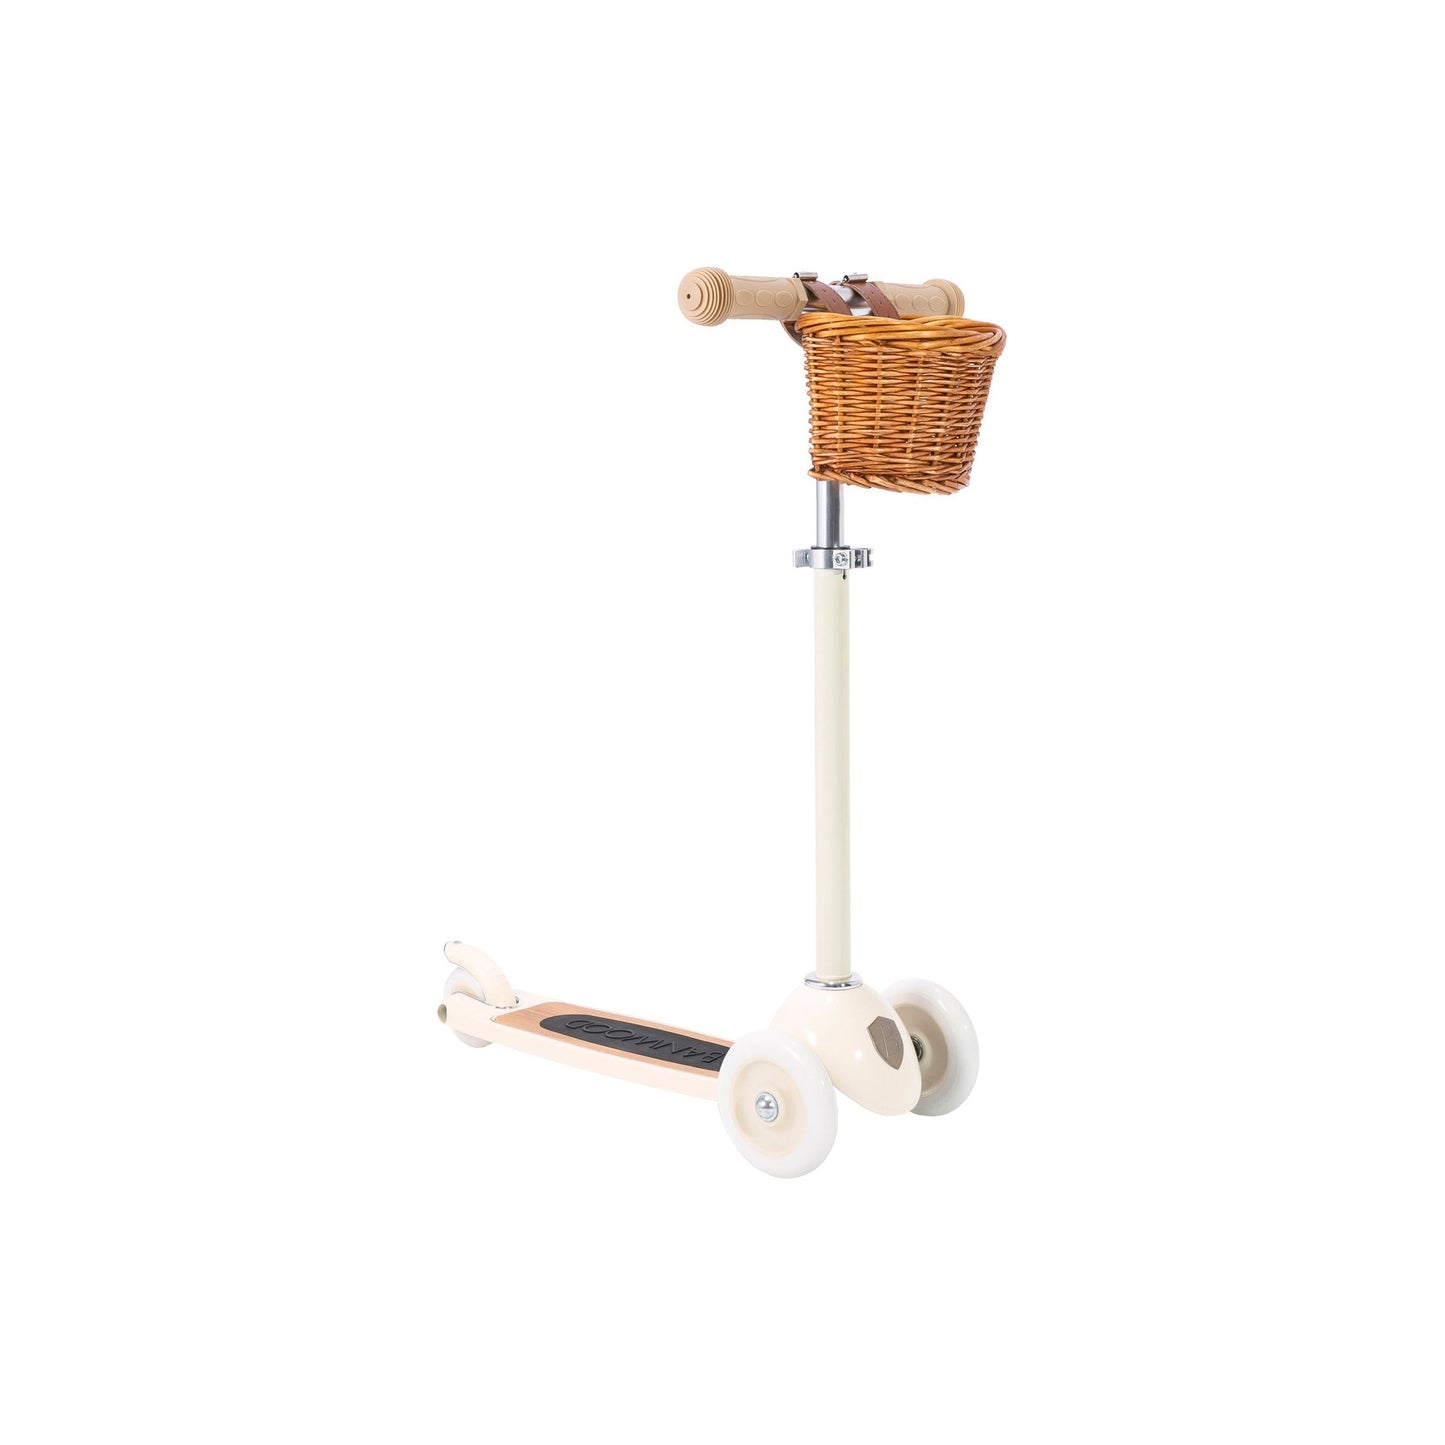 Banwood Scooter with Basket - Age 3+